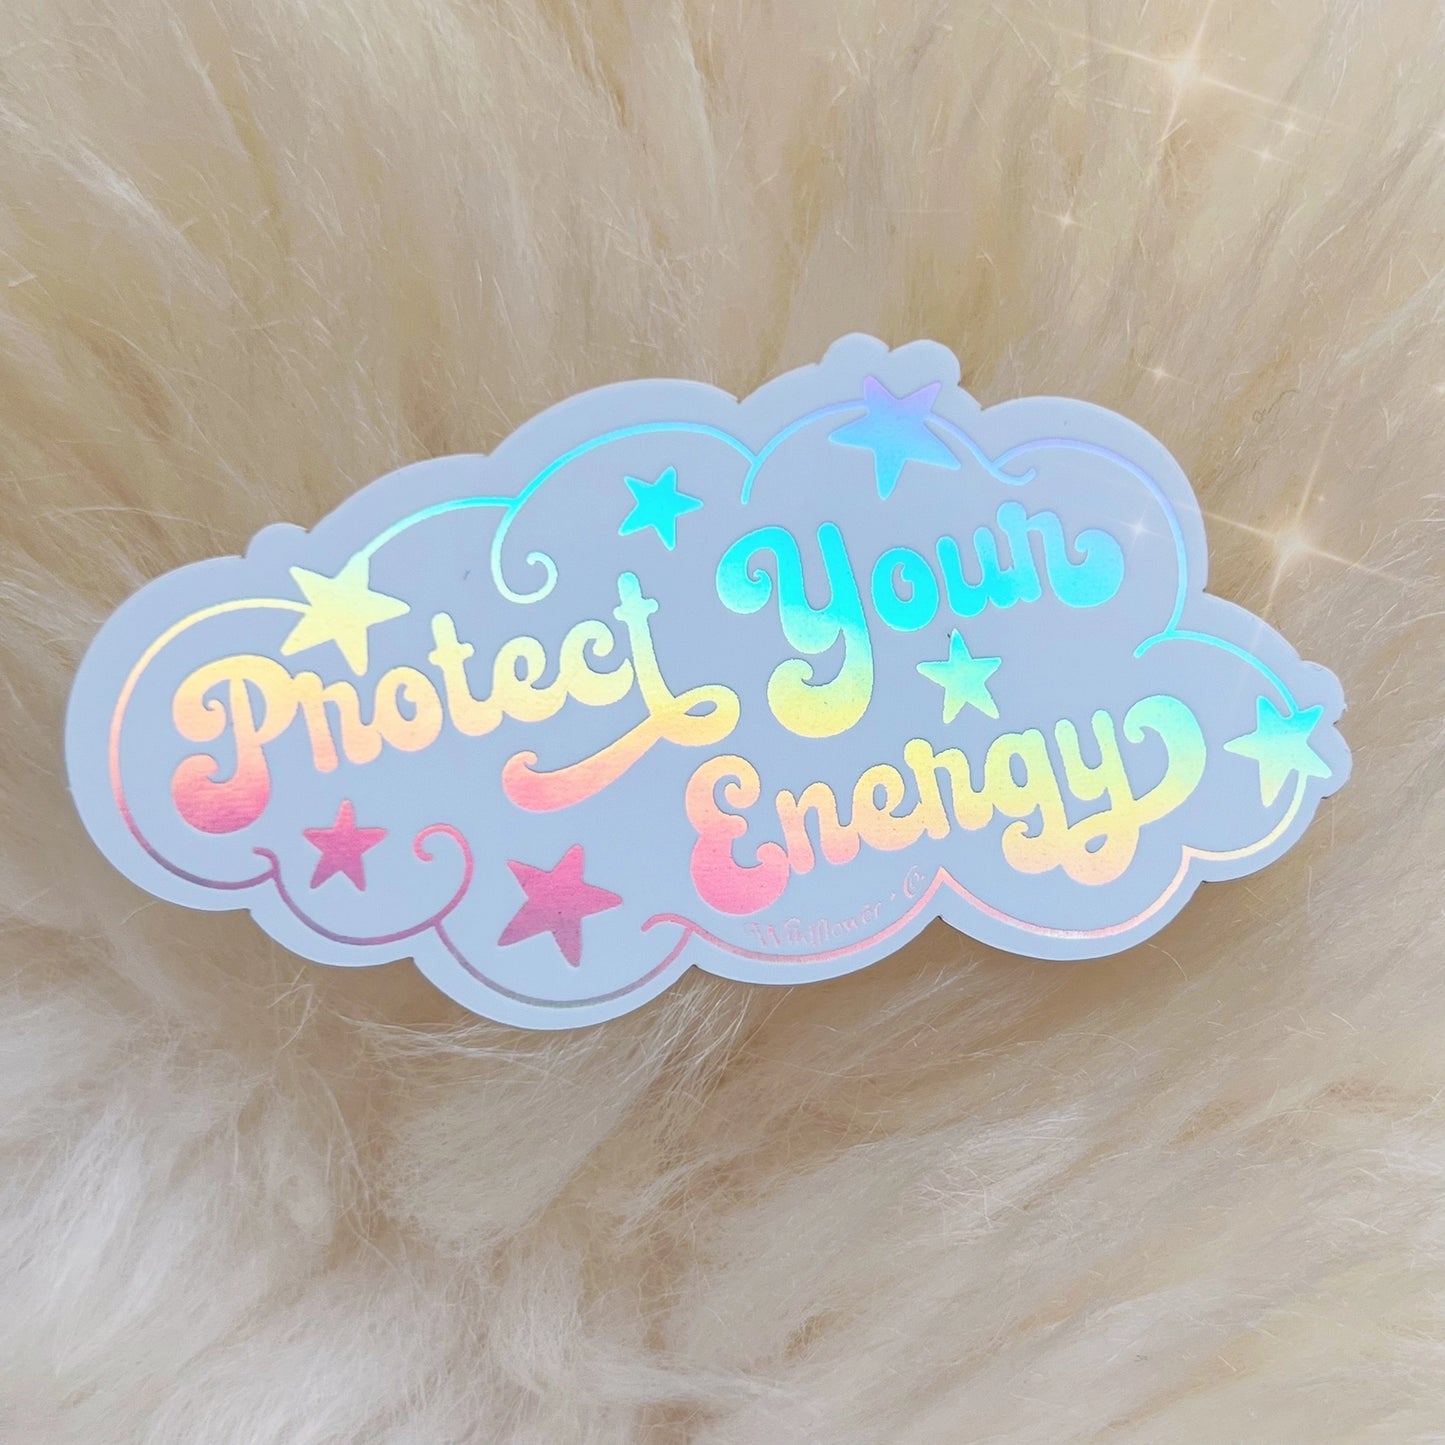 Protect Your Energy Sticker - Moon Room Shop and Wellness